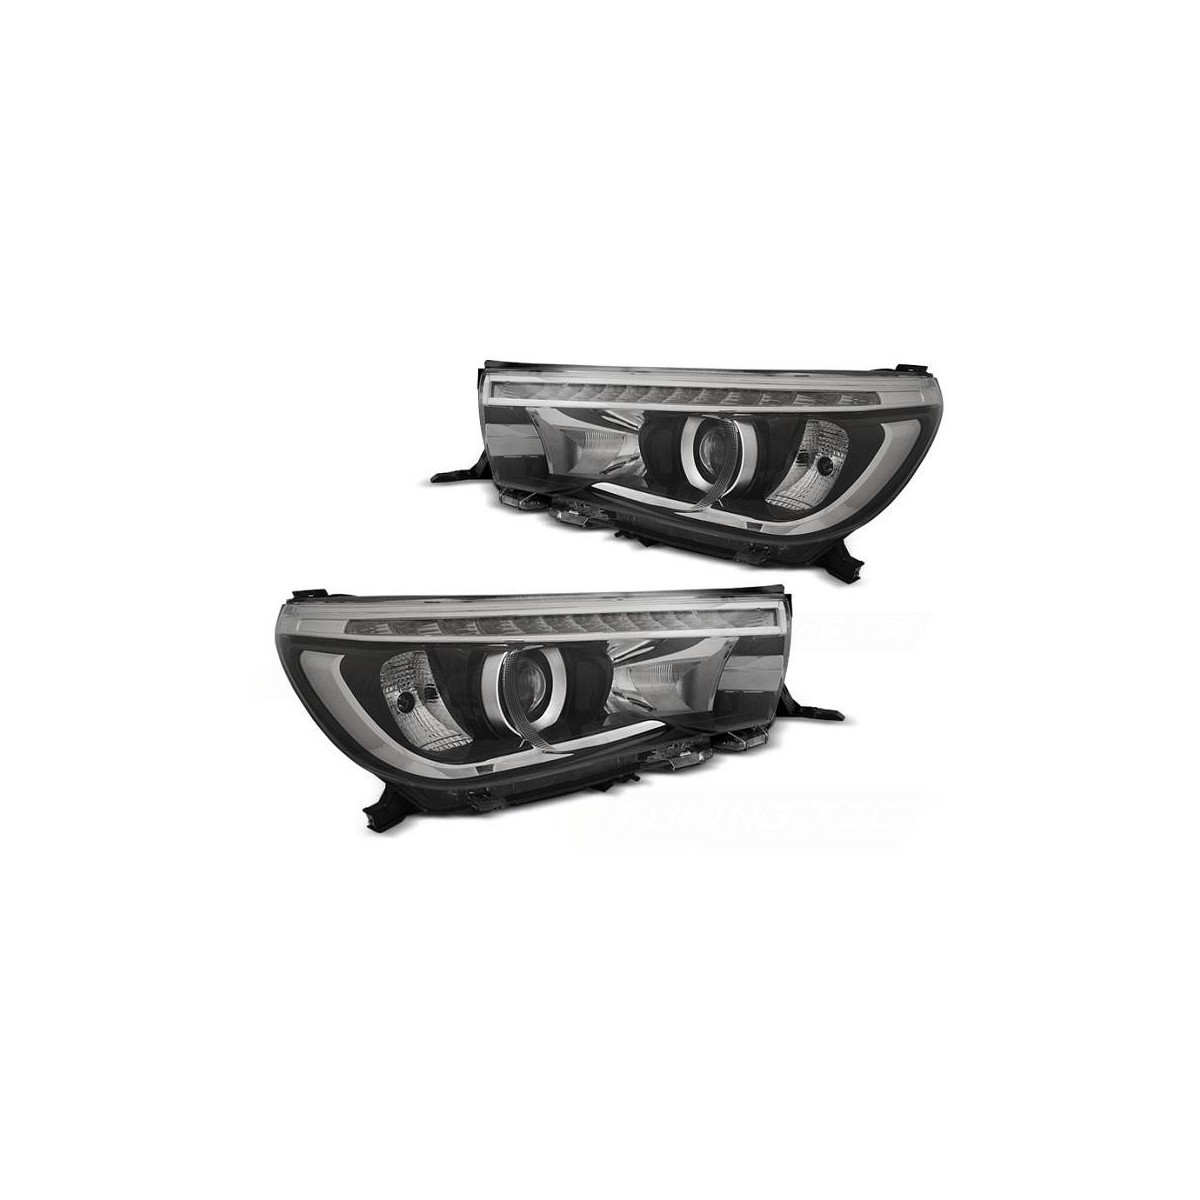 LAMPY TOYOTA HILUX 16 LED PROJECTOR TRUE DRL BLACK